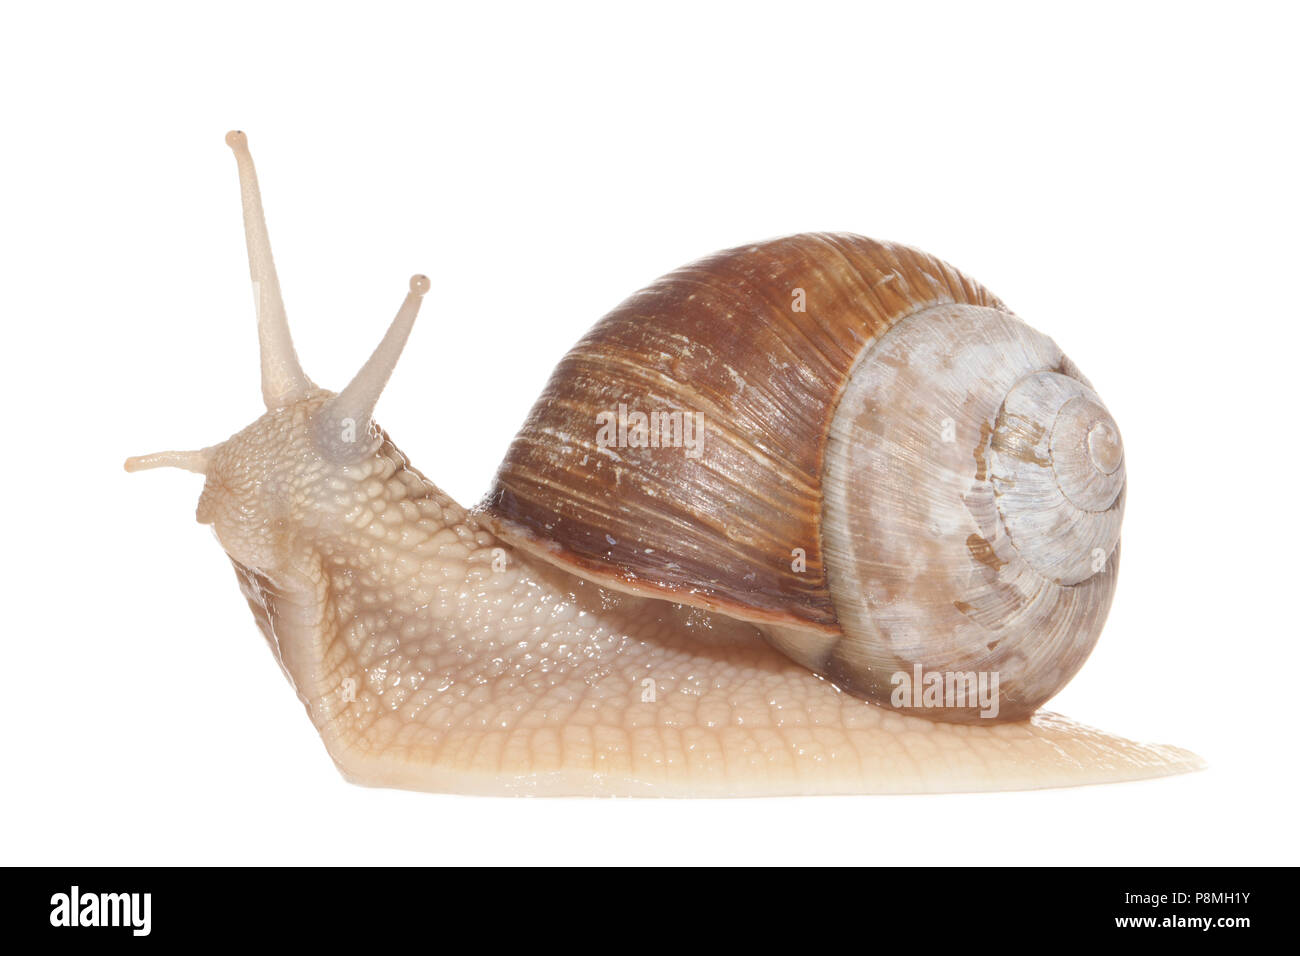 Roman snail isolated against a white background Stock Photo